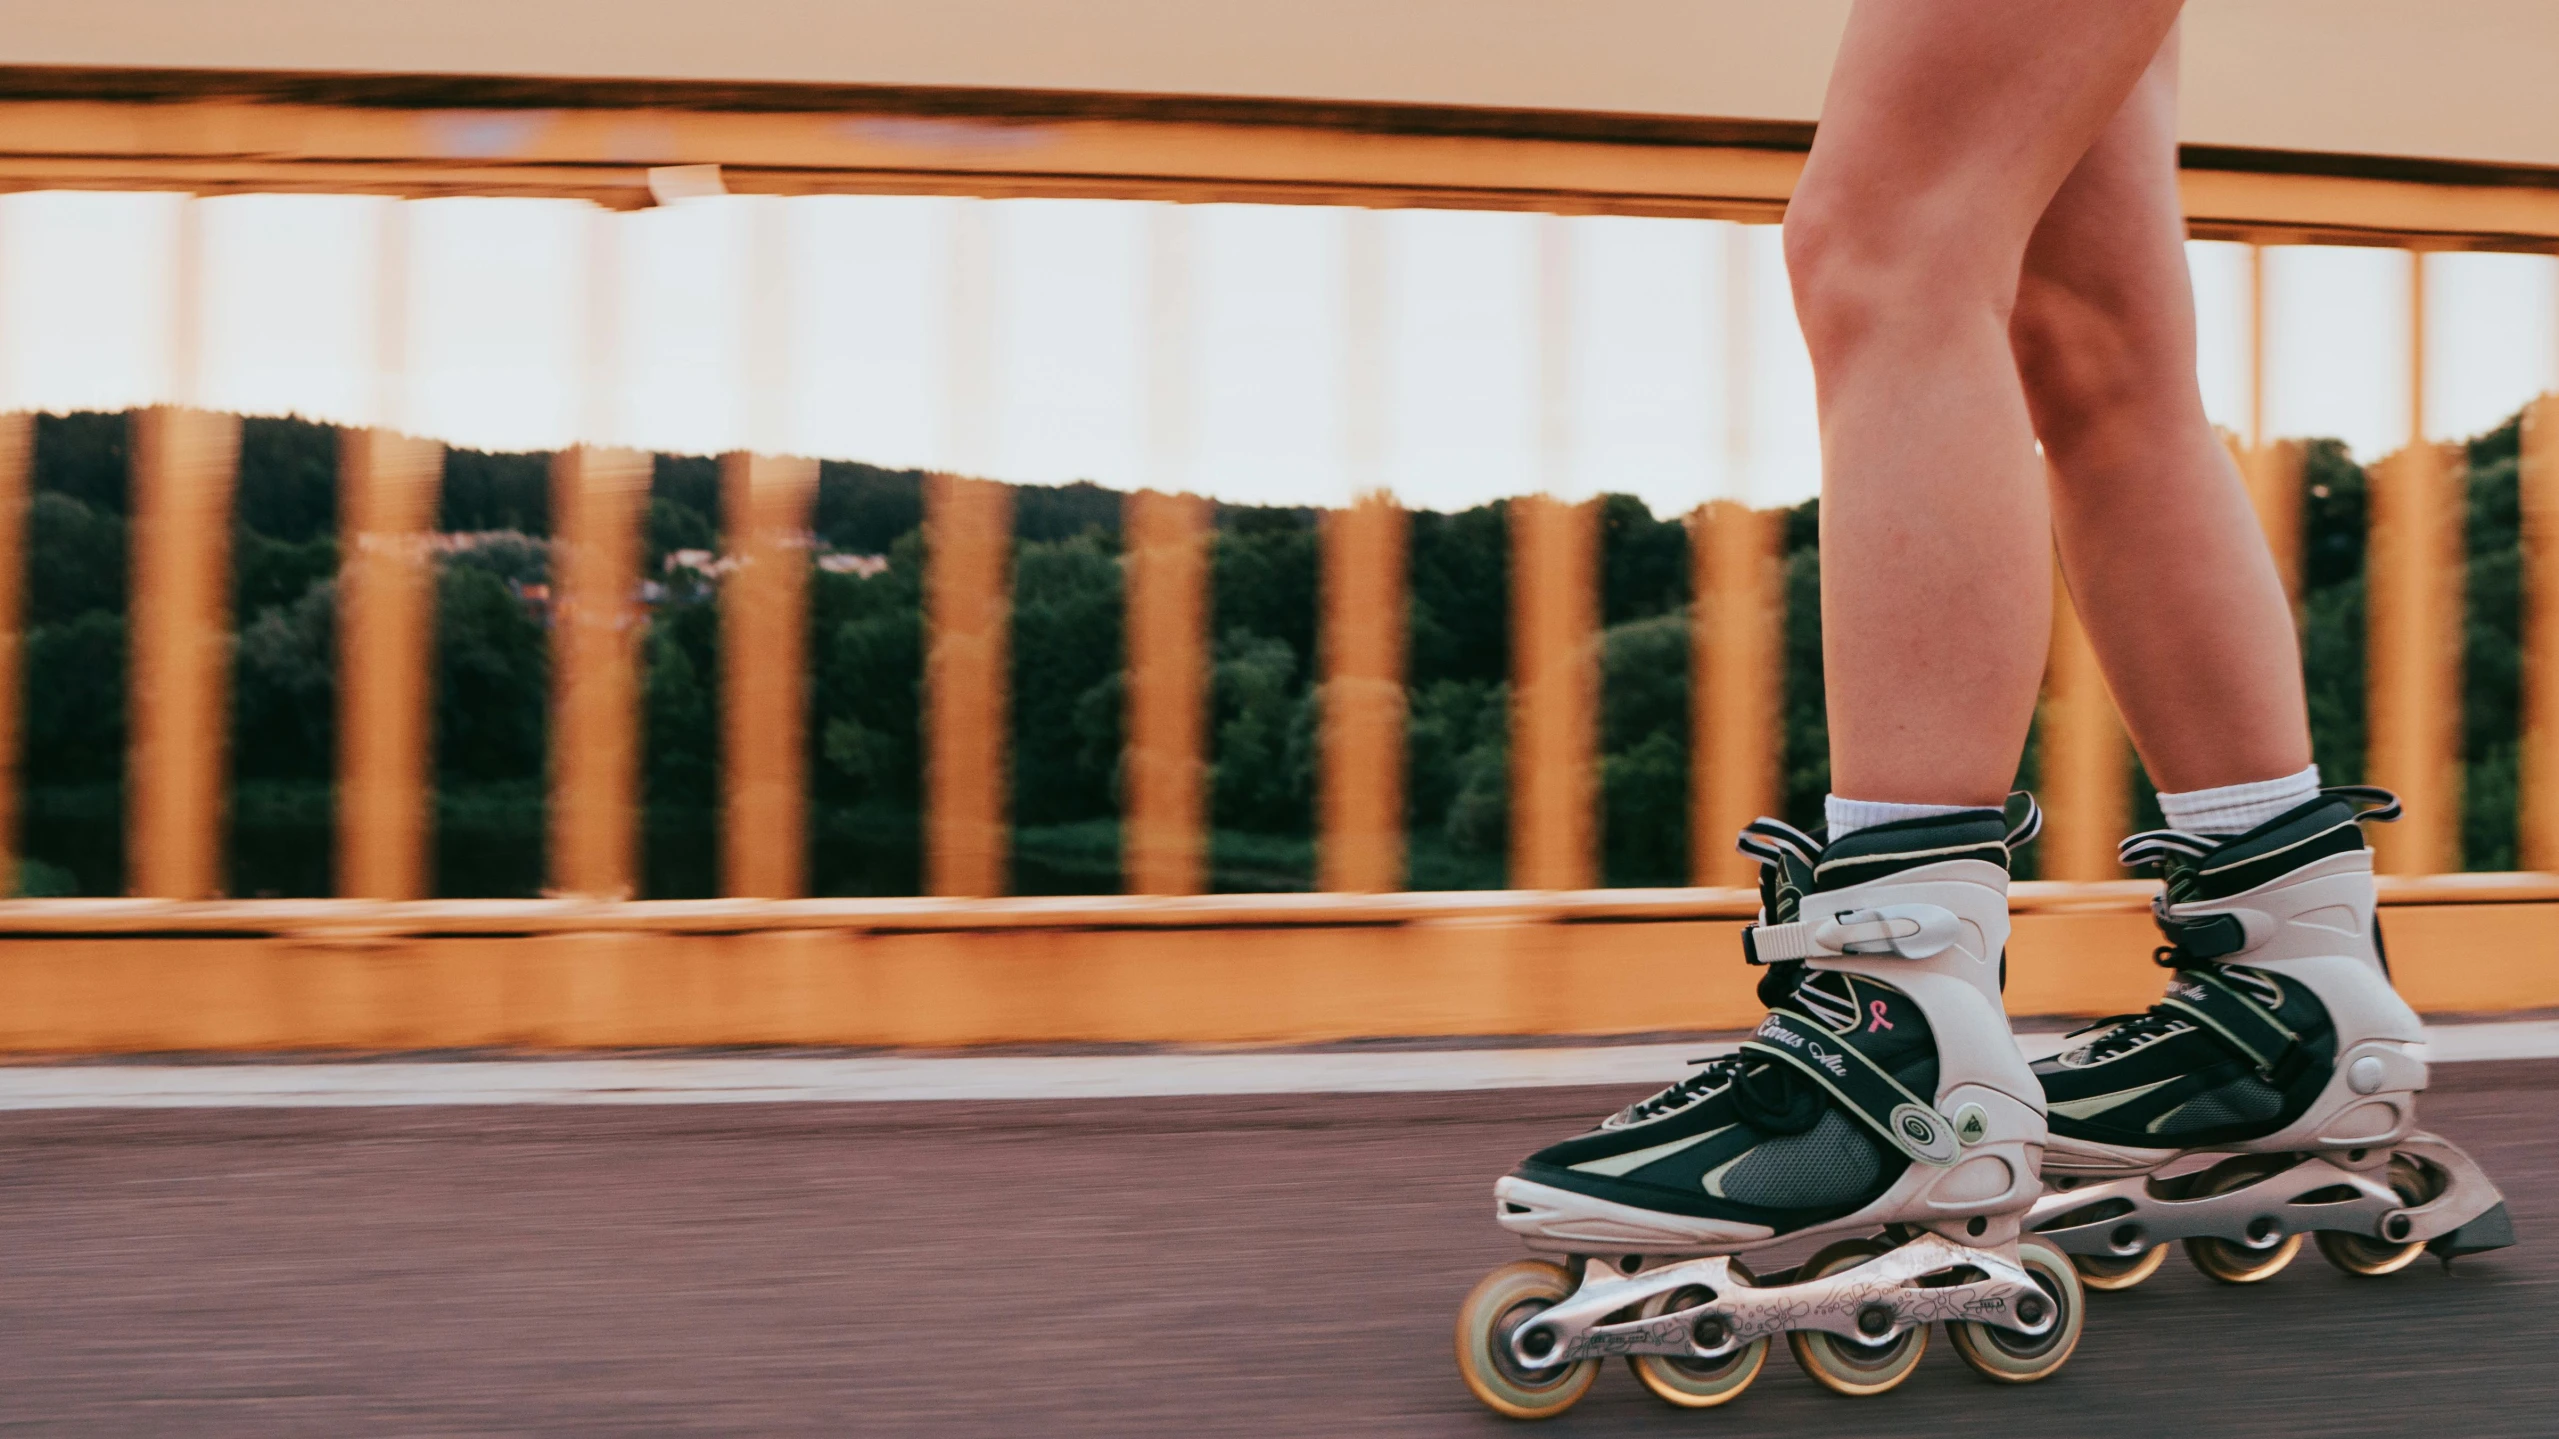 the feet of two roller blades are being hed along by one another